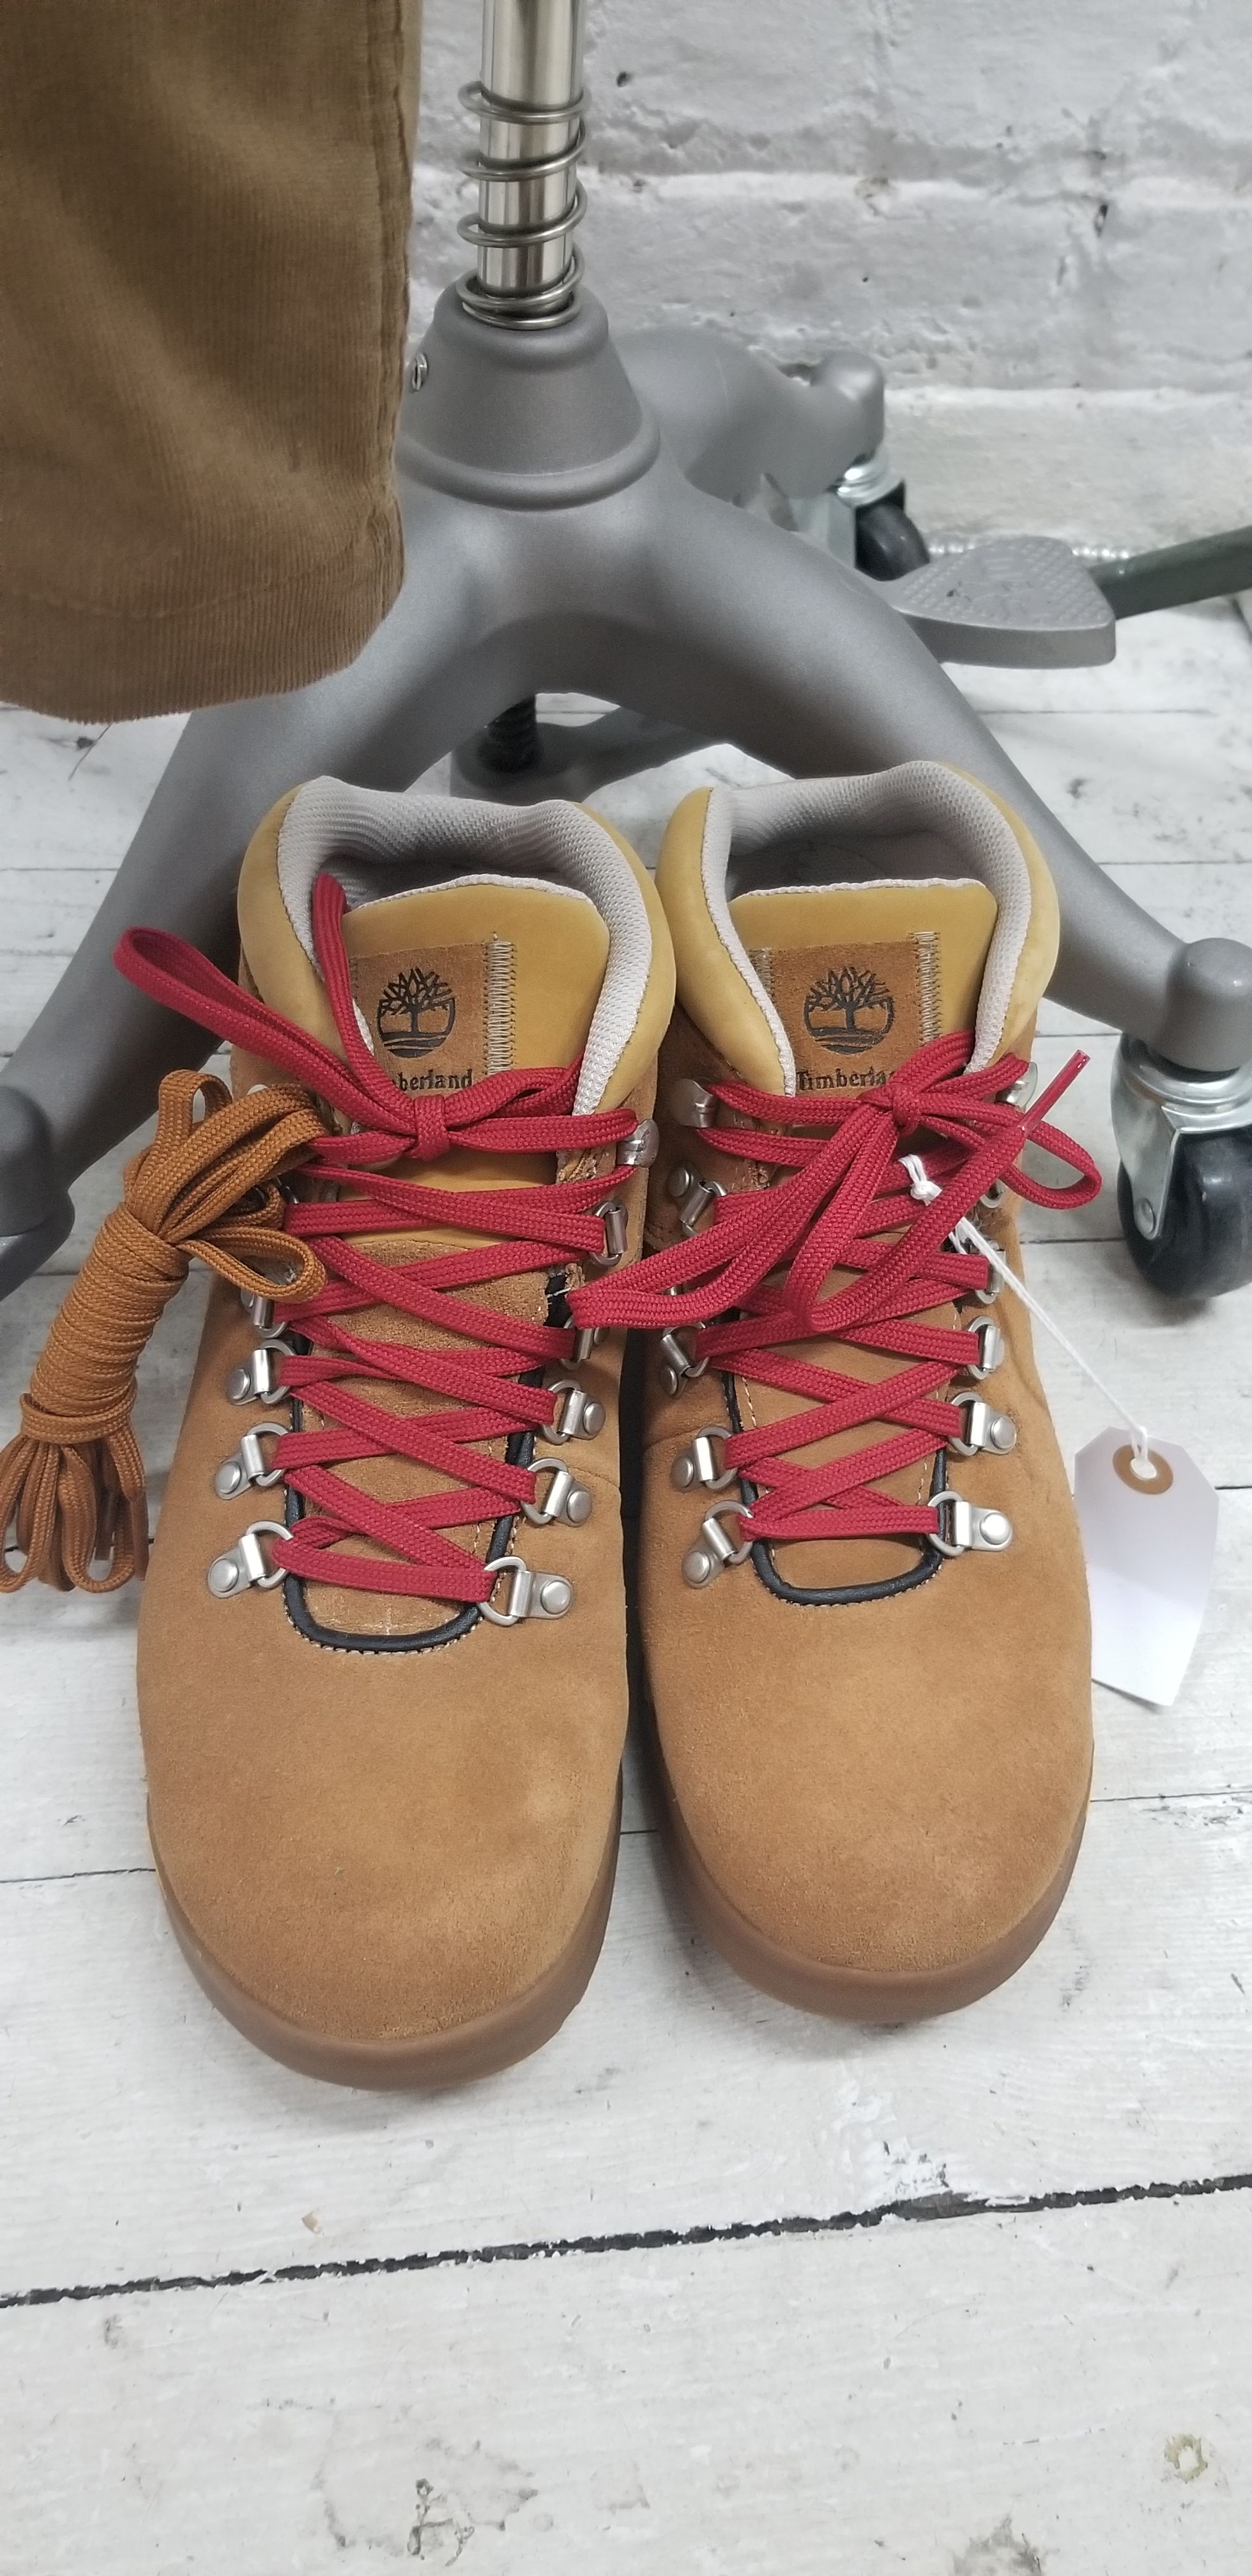 oficial Fanático pedir Timberland for J.Crew GT Scramble hiking boots - 8.5M for Sale in Queens,  NY - OfferUp